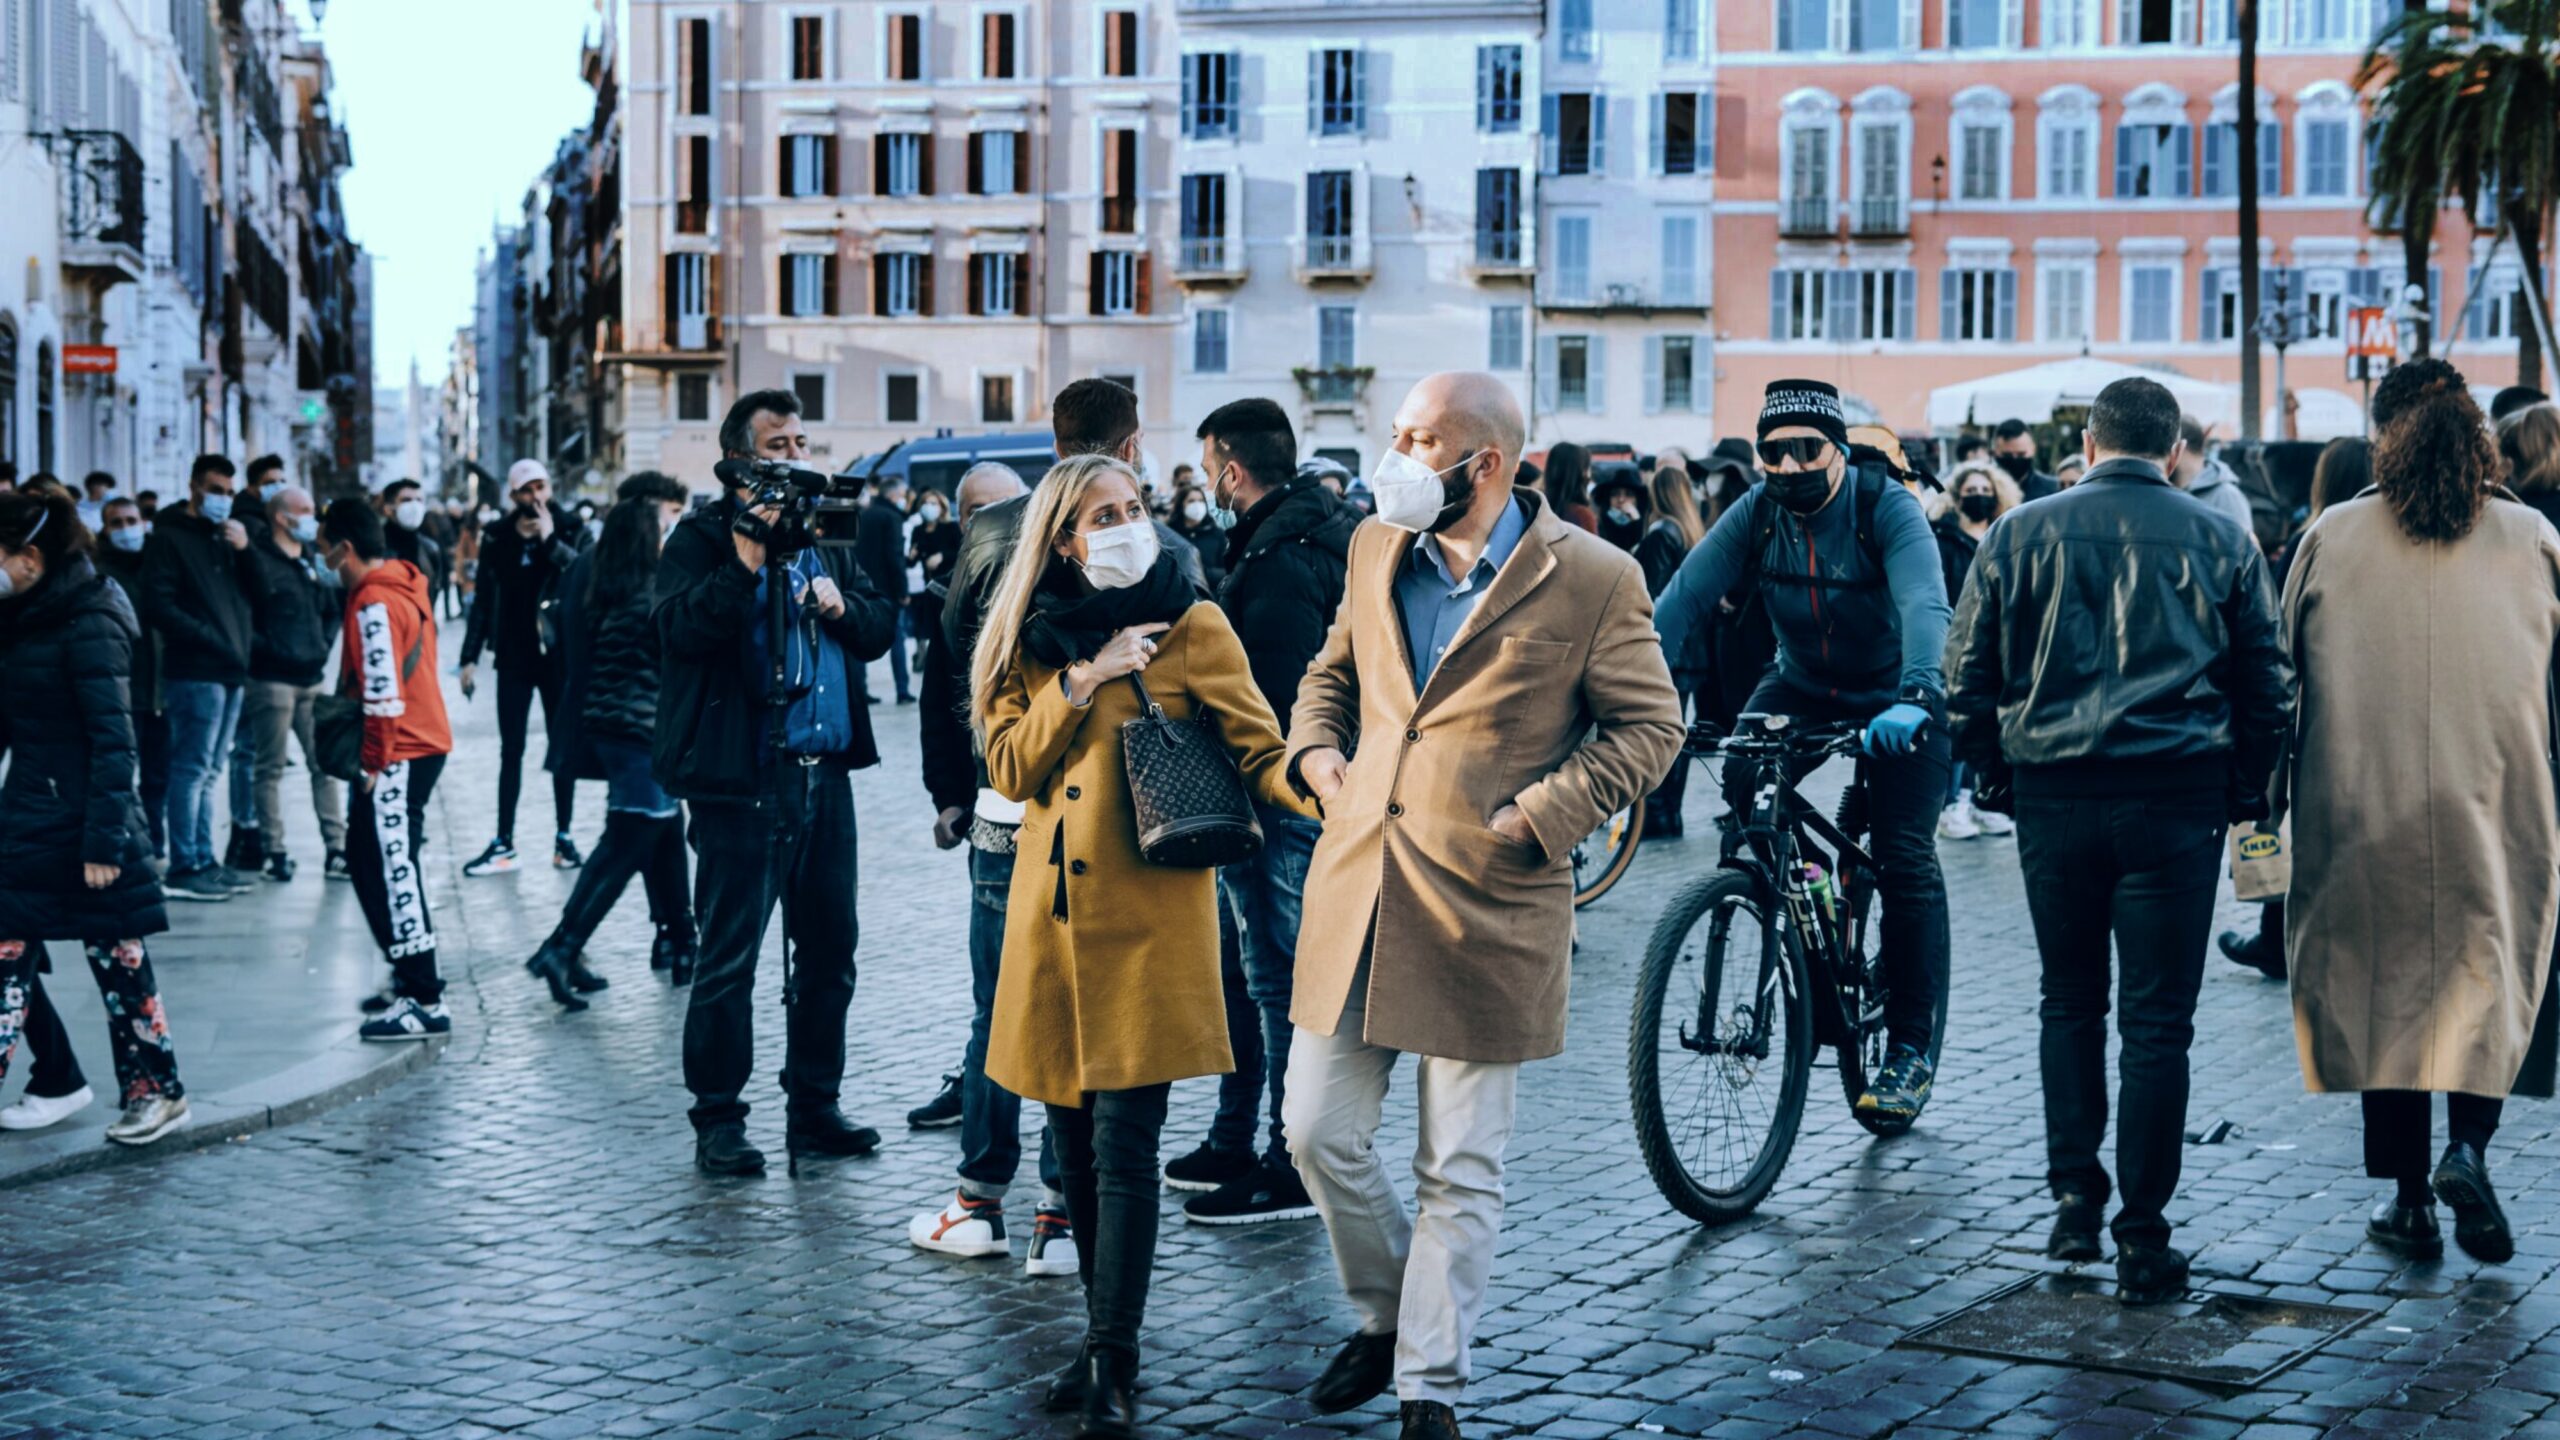 New Social Credit System In Italy Could Lead To 'Serious Violations Of Rights,' Spark Dangerous Trend - Harbingers Daily